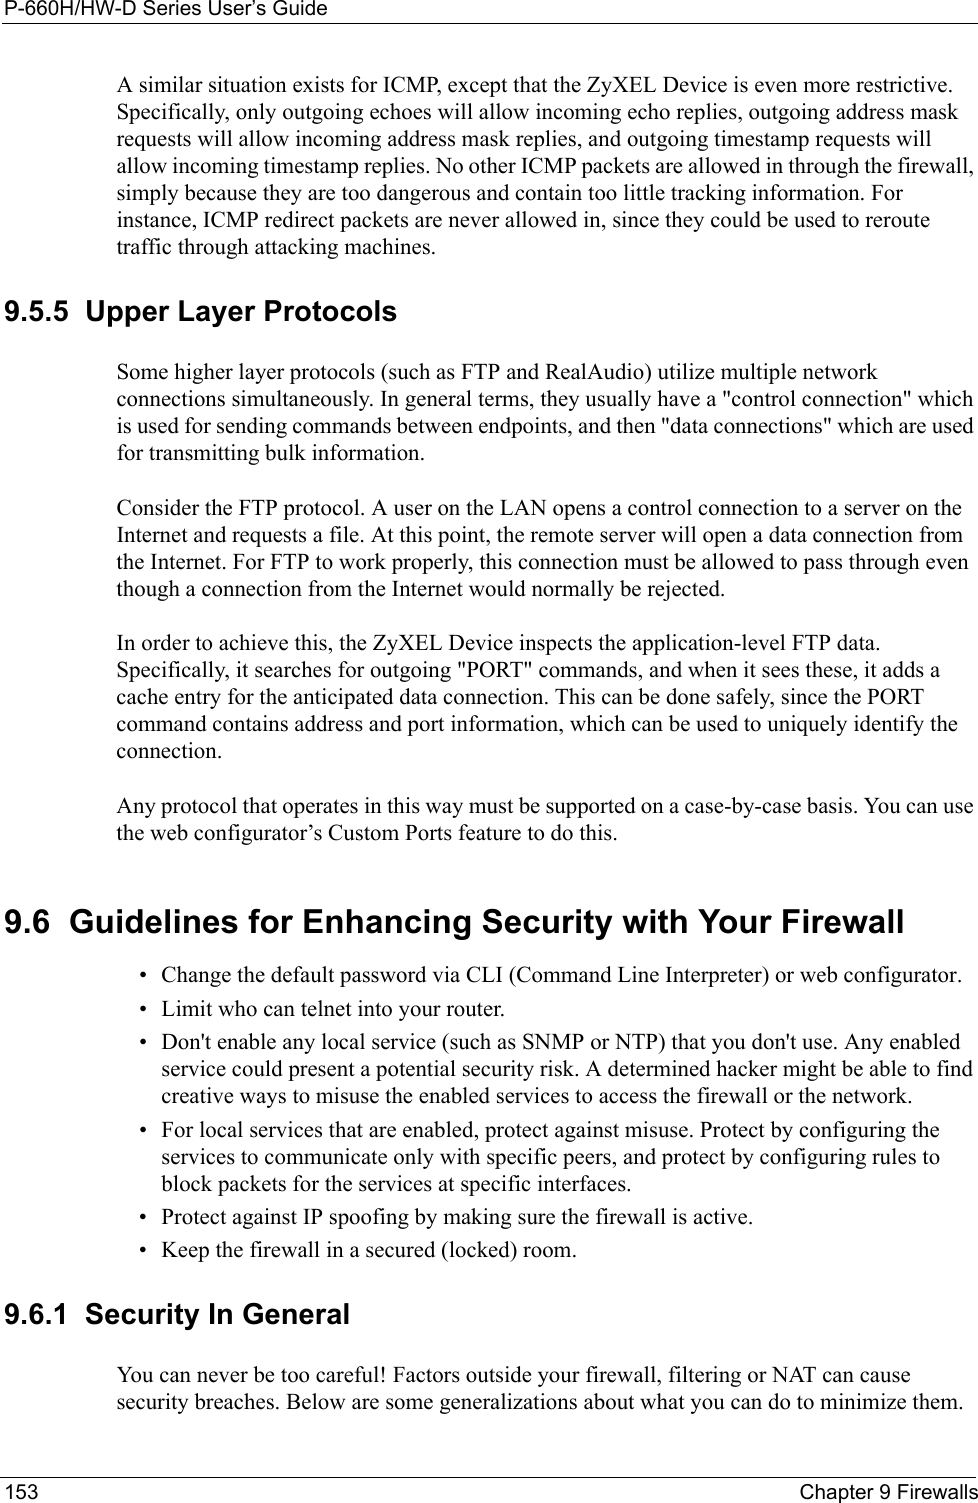 P-660H/HW-D Series User’s Guide153 Chapter 9 FirewallsA similar situation exists for ICMP, except that the ZyXEL Device is even more restrictive. Specifically, only outgoing echoes will allow incoming echo replies, outgoing address mask requests will allow incoming address mask replies, and outgoing timestamp requests will allow incoming timestamp replies. No other ICMP packets are allowed in through the firewall, simply because they are too dangerous and contain too little tracking information. For instance, ICMP redirect packets are never allowed in, since they could be used to reroute traffic through attacking machines. 9.5.5  Upper Layer ProtocolsSome higher layer protocols (such as FTP and RealAudio) utilize multiple network connections simultaneously. In general terms, they usually have a &quot;control connection&quot; which is used for sending commands between endpoints, and then &quot;data connections&quot; which are used for transmitting bulk information. Consider the FTP protocol. A user on the LAN opens a control connection to a server on the Internet and requests a file. At this point, the remote server will open a data connection from the Internet. For FTP to work properly, this connection must be allowed to pass through even though a connection from the Internet would normally be rejected.In order to achieve this, the ZyXEL Device inspects the application-level FTP data. Specifically, it searches for outgoing &quot;PORT&quot; commands, and when it sees these, it adds a cache entry for the anticipated data connection. This can be done safely, since the PORT command contains address and port information, which can be used to uniquely identify the connection.Any protocol that operates in this way must be supported on a case-by-case basis. You can use the web configurator’s Custom Ports feature to do this.9.6  Guidelines for Enhancing Security with Your Firewall• Change the default password via CLI (Command Line Interpreter) or web configurator. • Limit who can telnet into your router. • Don&apos;t enable any local service (such as SNMP or NTP) that you don&apos;t use. Any enabled service could present a potential security risk. A determined hacker might be able to find creative ways to misuse the enabled services to access the firewall or the network. • For local services that are enabled, protect against misuse. Protect by configuring the services to communicate only with specific peers, and protect by configuring rules to block packets for the services at specific interfaces. • Protect against IP spoofing by making sure the firewall is active. • Keep the firewall in a secured (locked) room. 9.6.1  Security In GeneralYou can never be too careful! Factors outside your firewall, filtering or NAT can cause security breaches. Below are some generalizations about what you can do to minimize them.